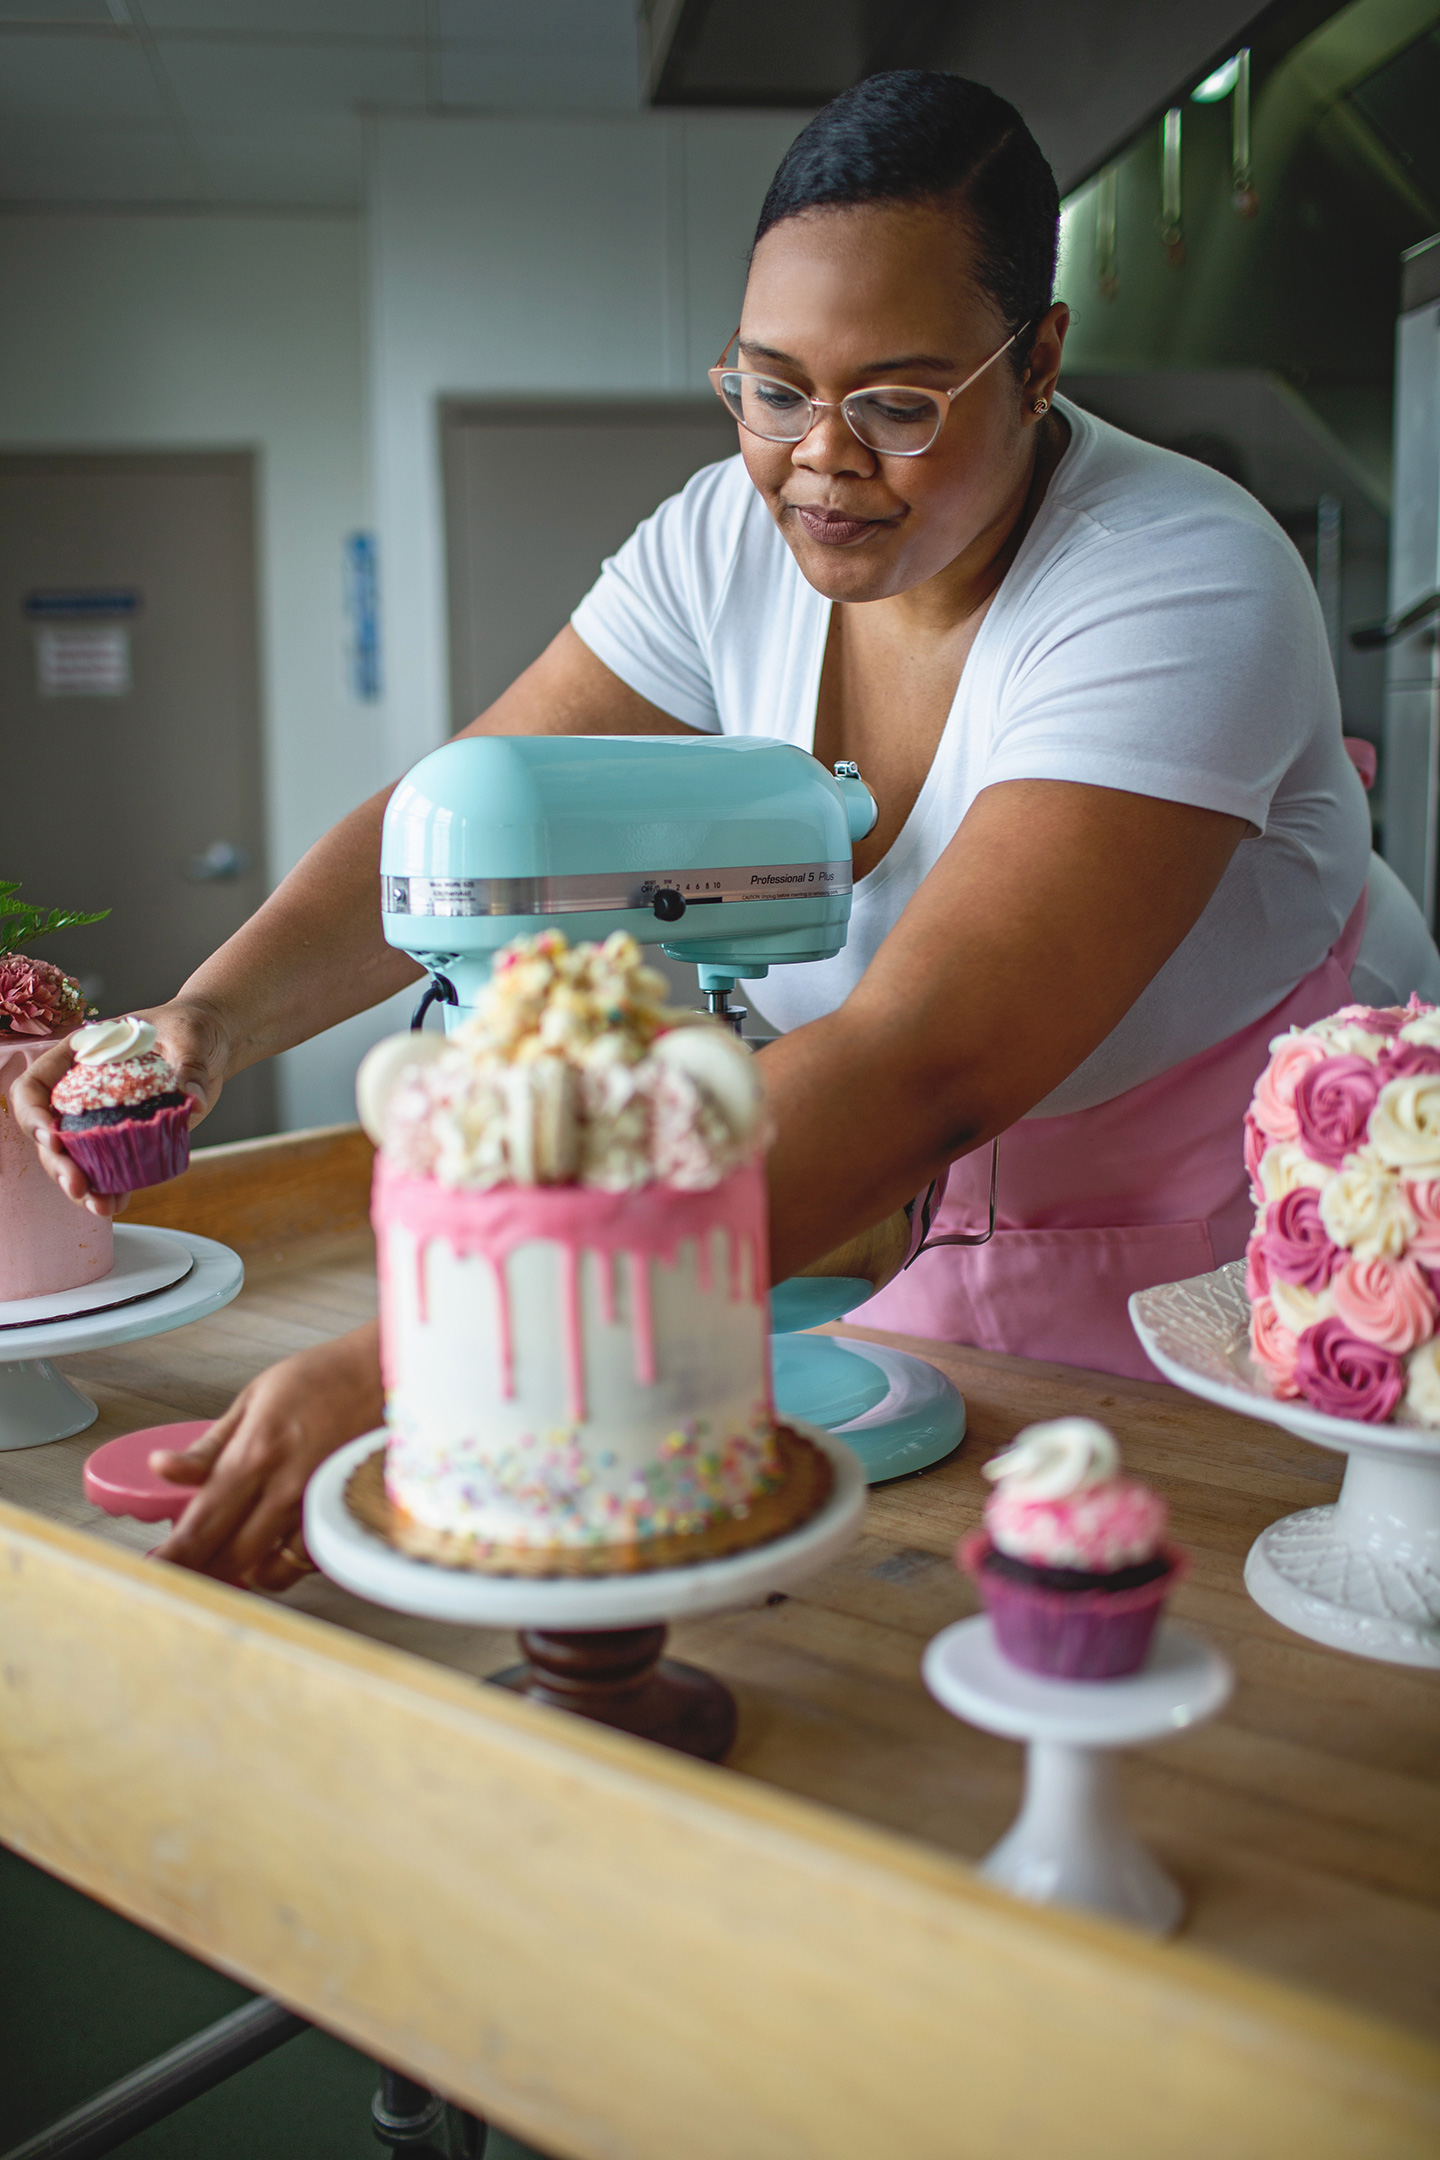 Setting up a Cake Decorating Business from Home in India